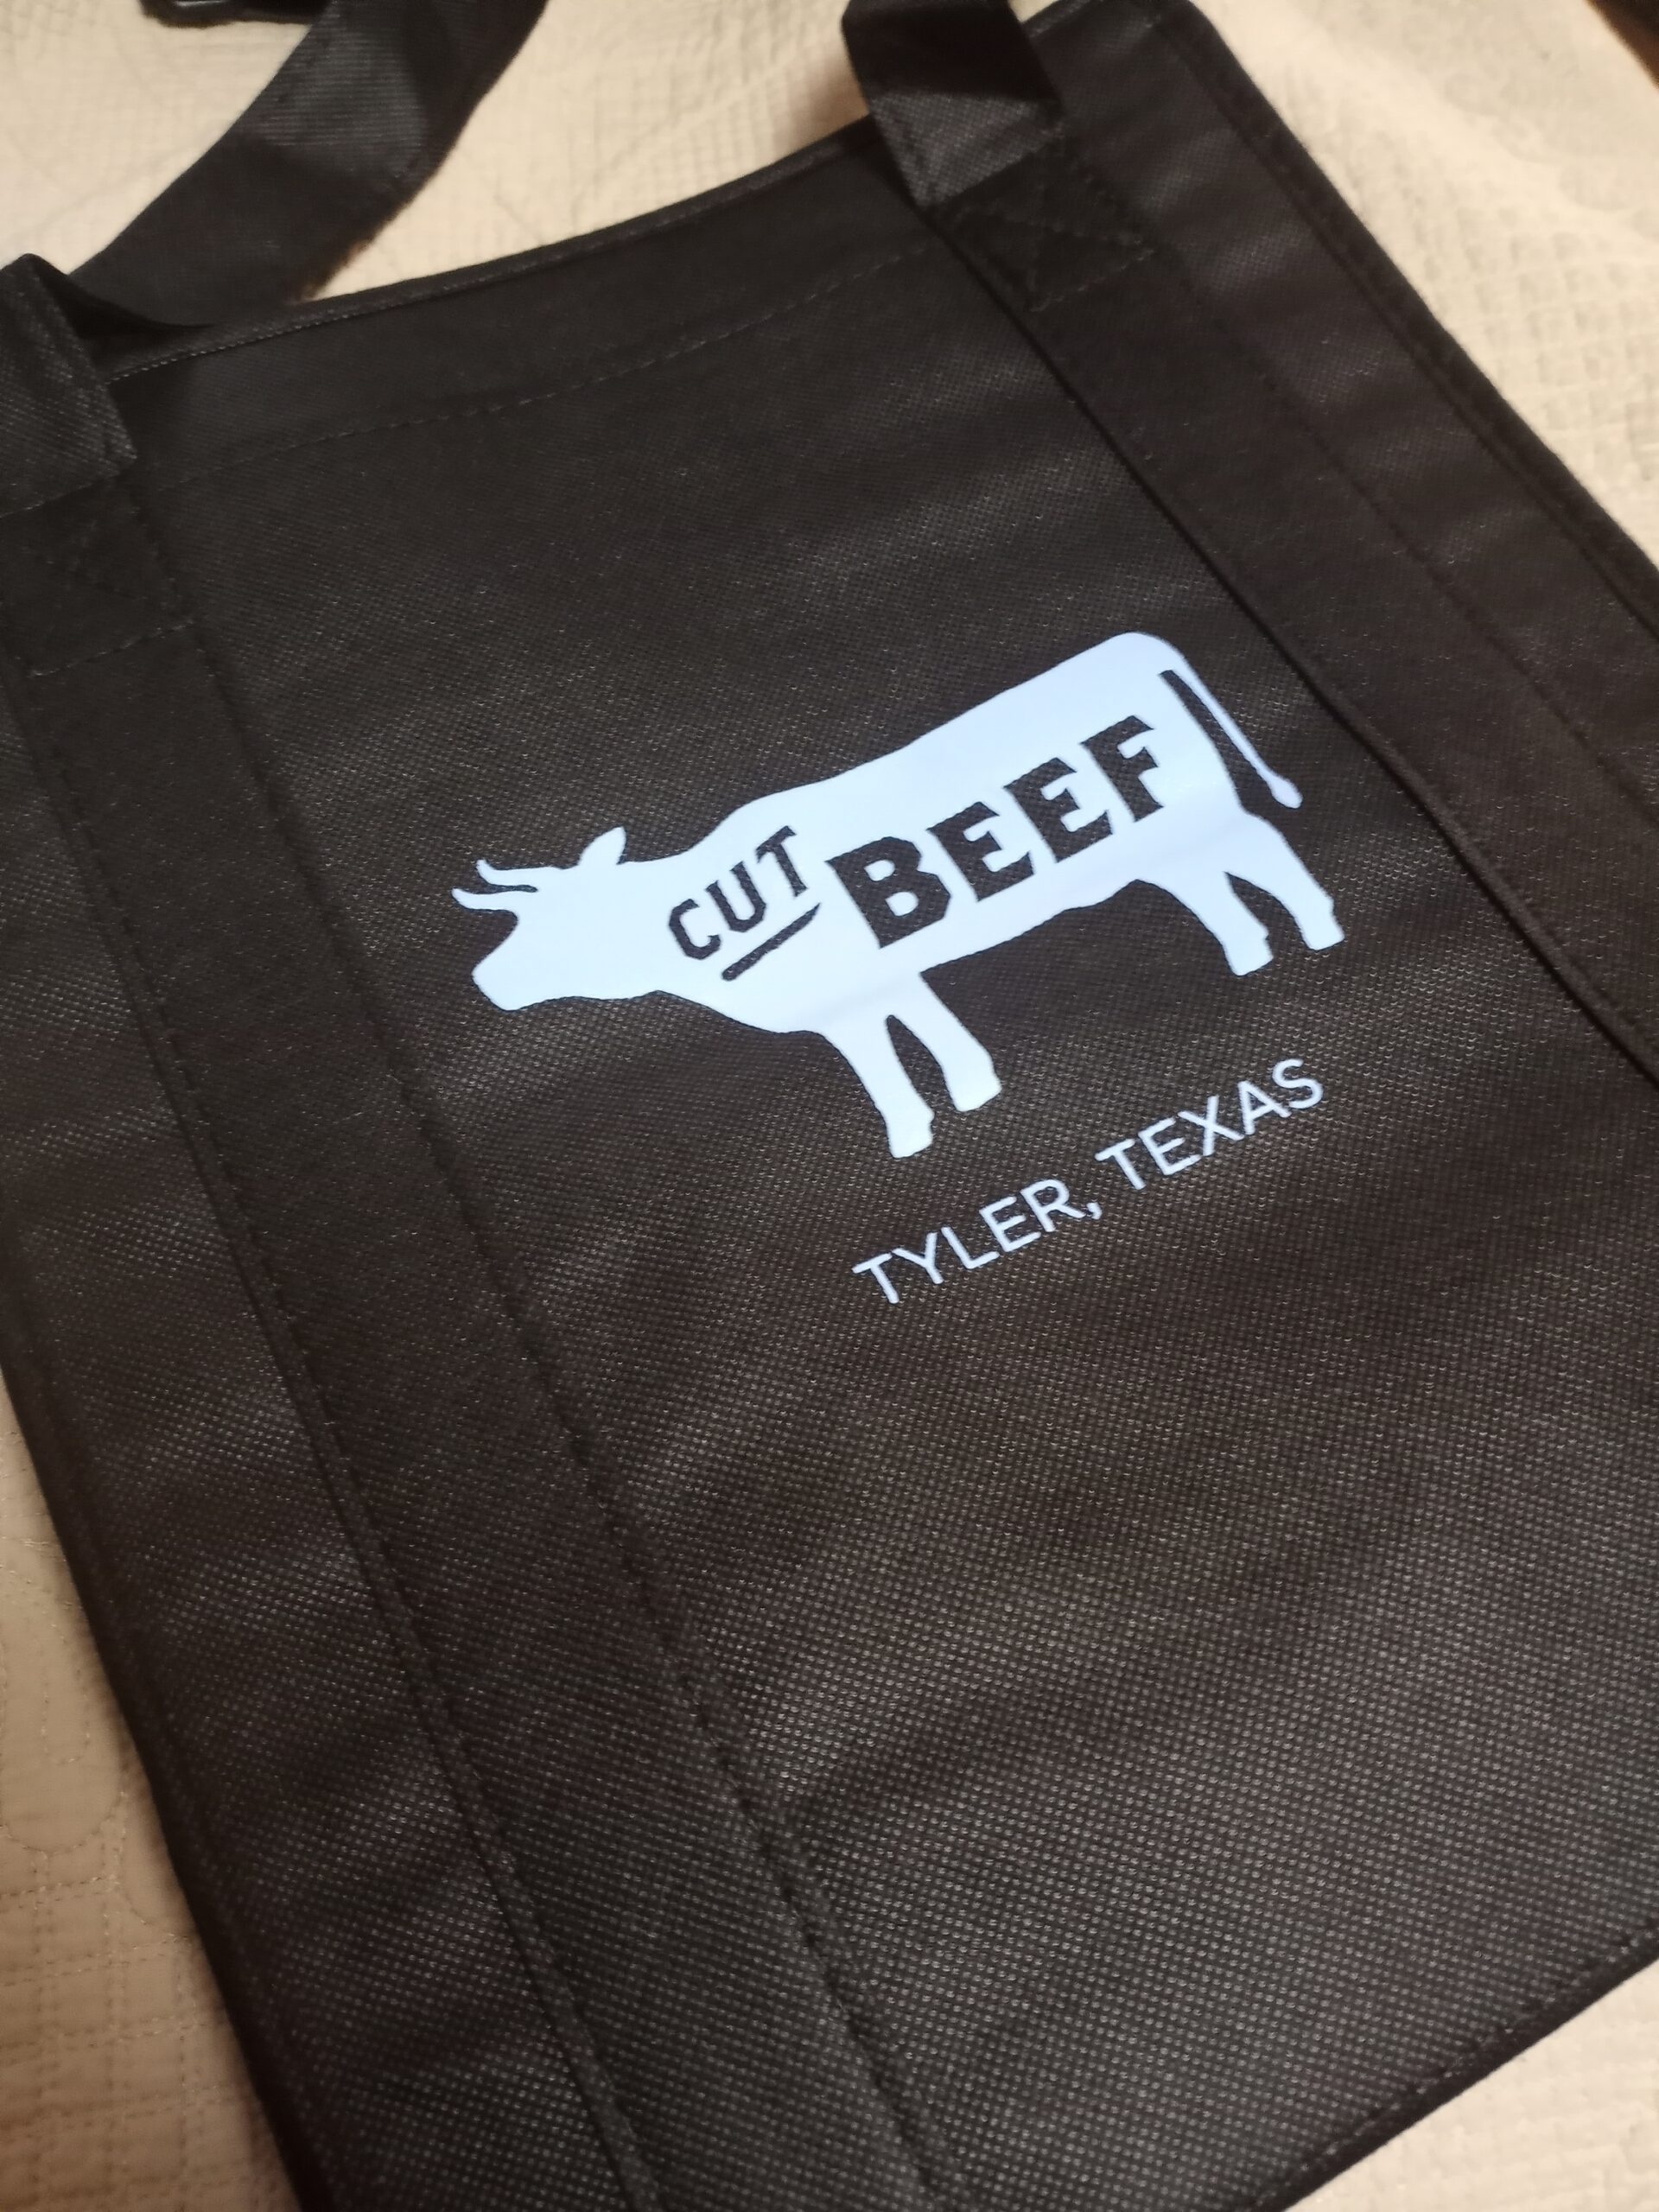 Adventures in shopping locally: Beef